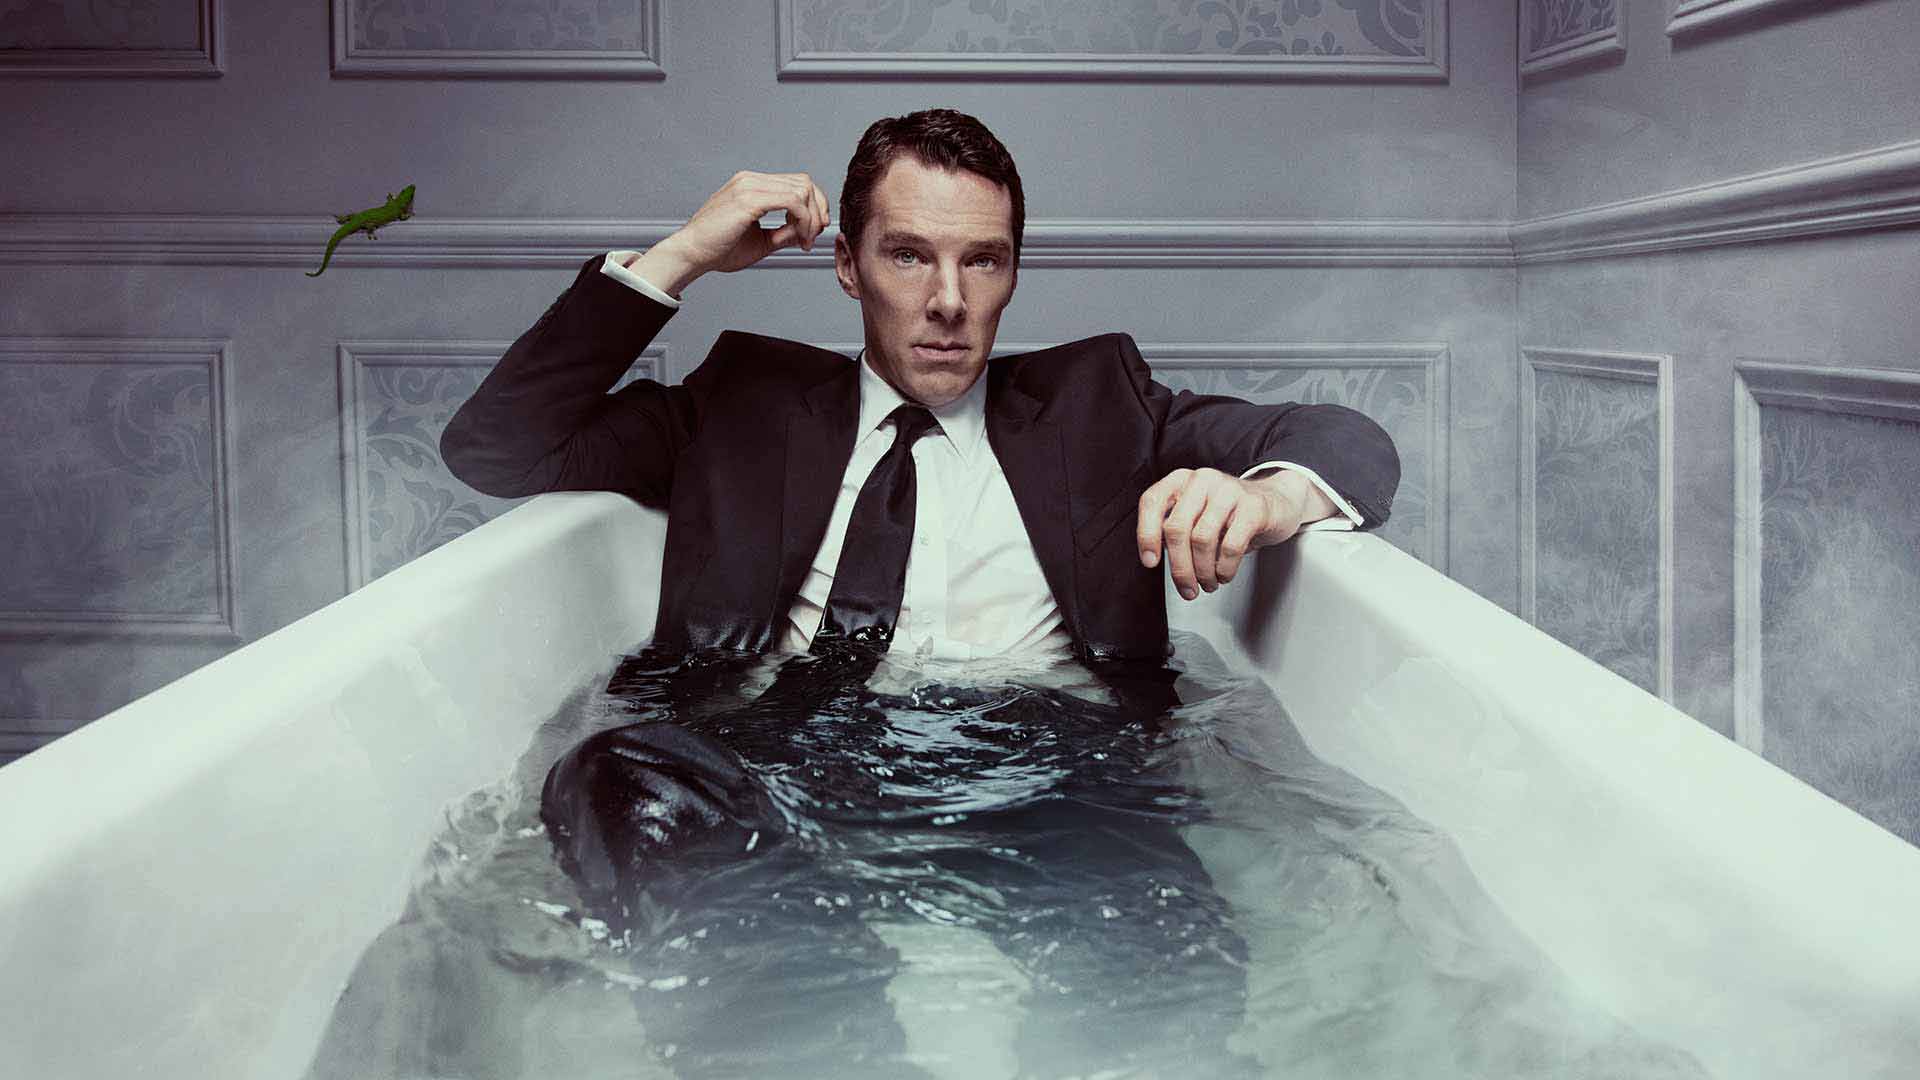 Benedict Cumberbatch stars as Patrick Melrose, here pictured wearing a suit in the bath